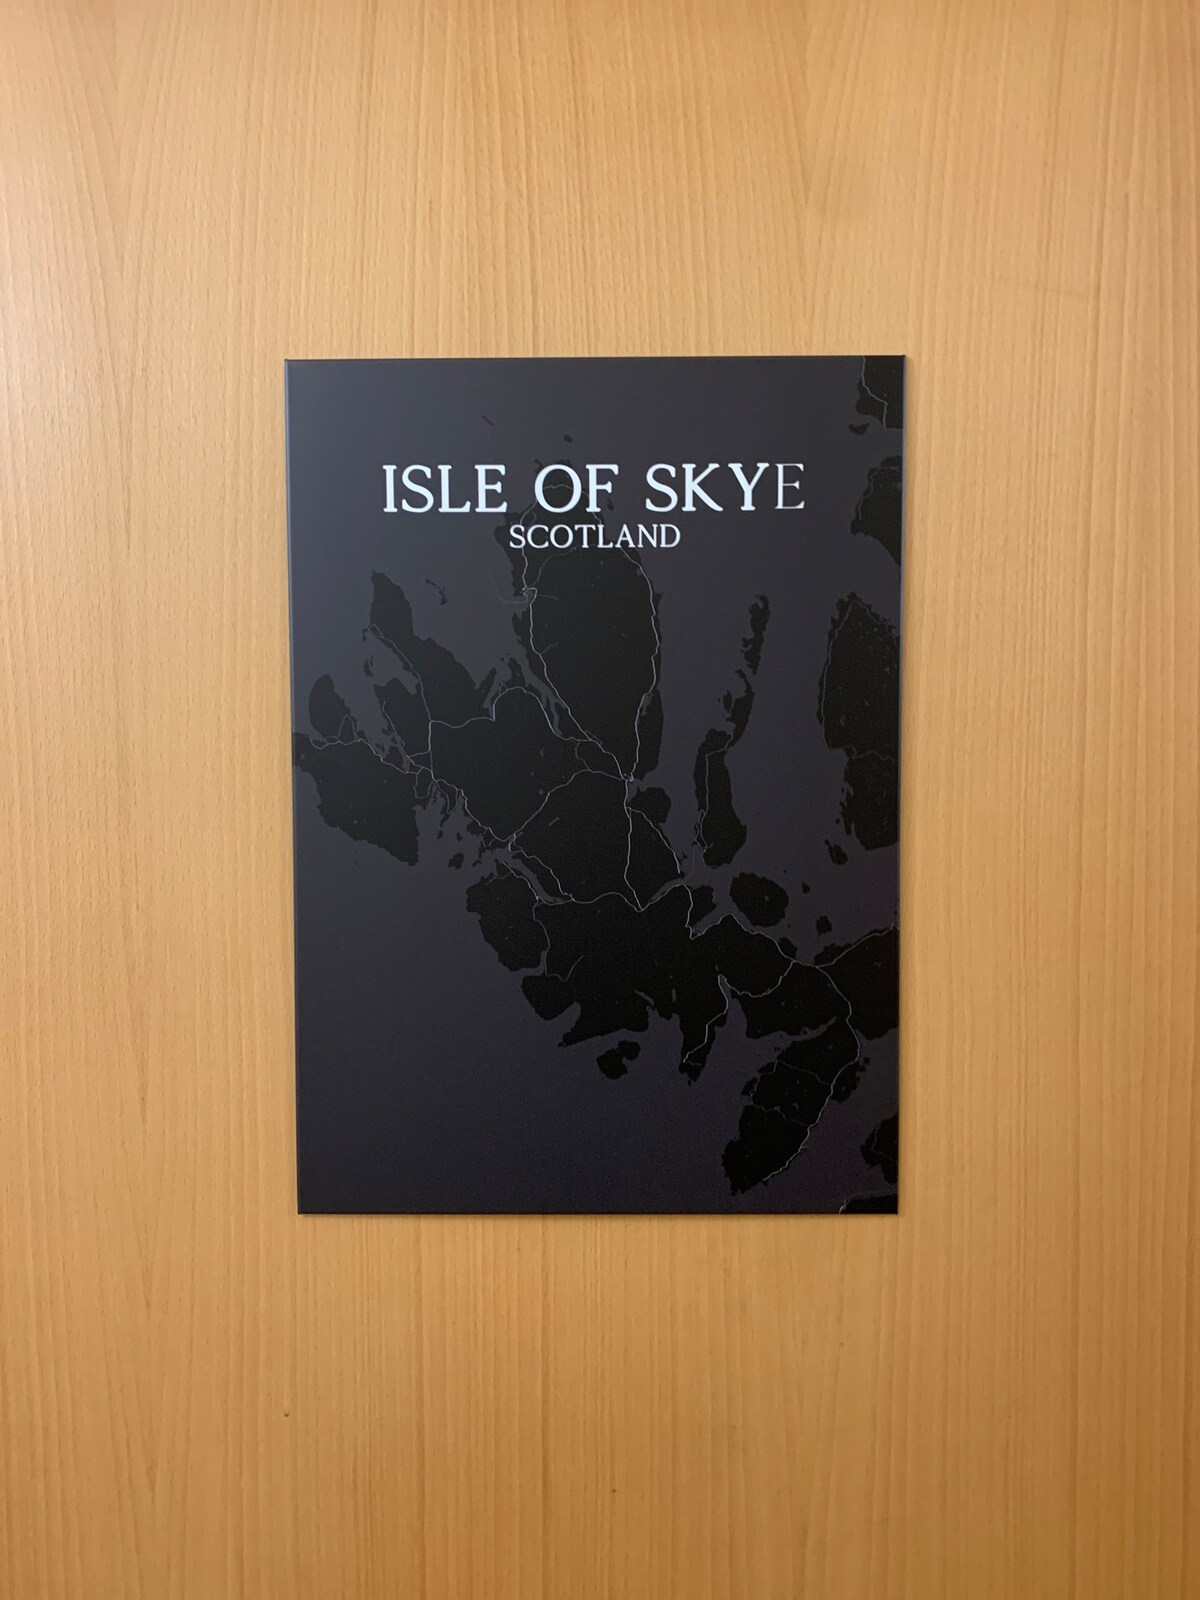 Your second home, Isle of Skye